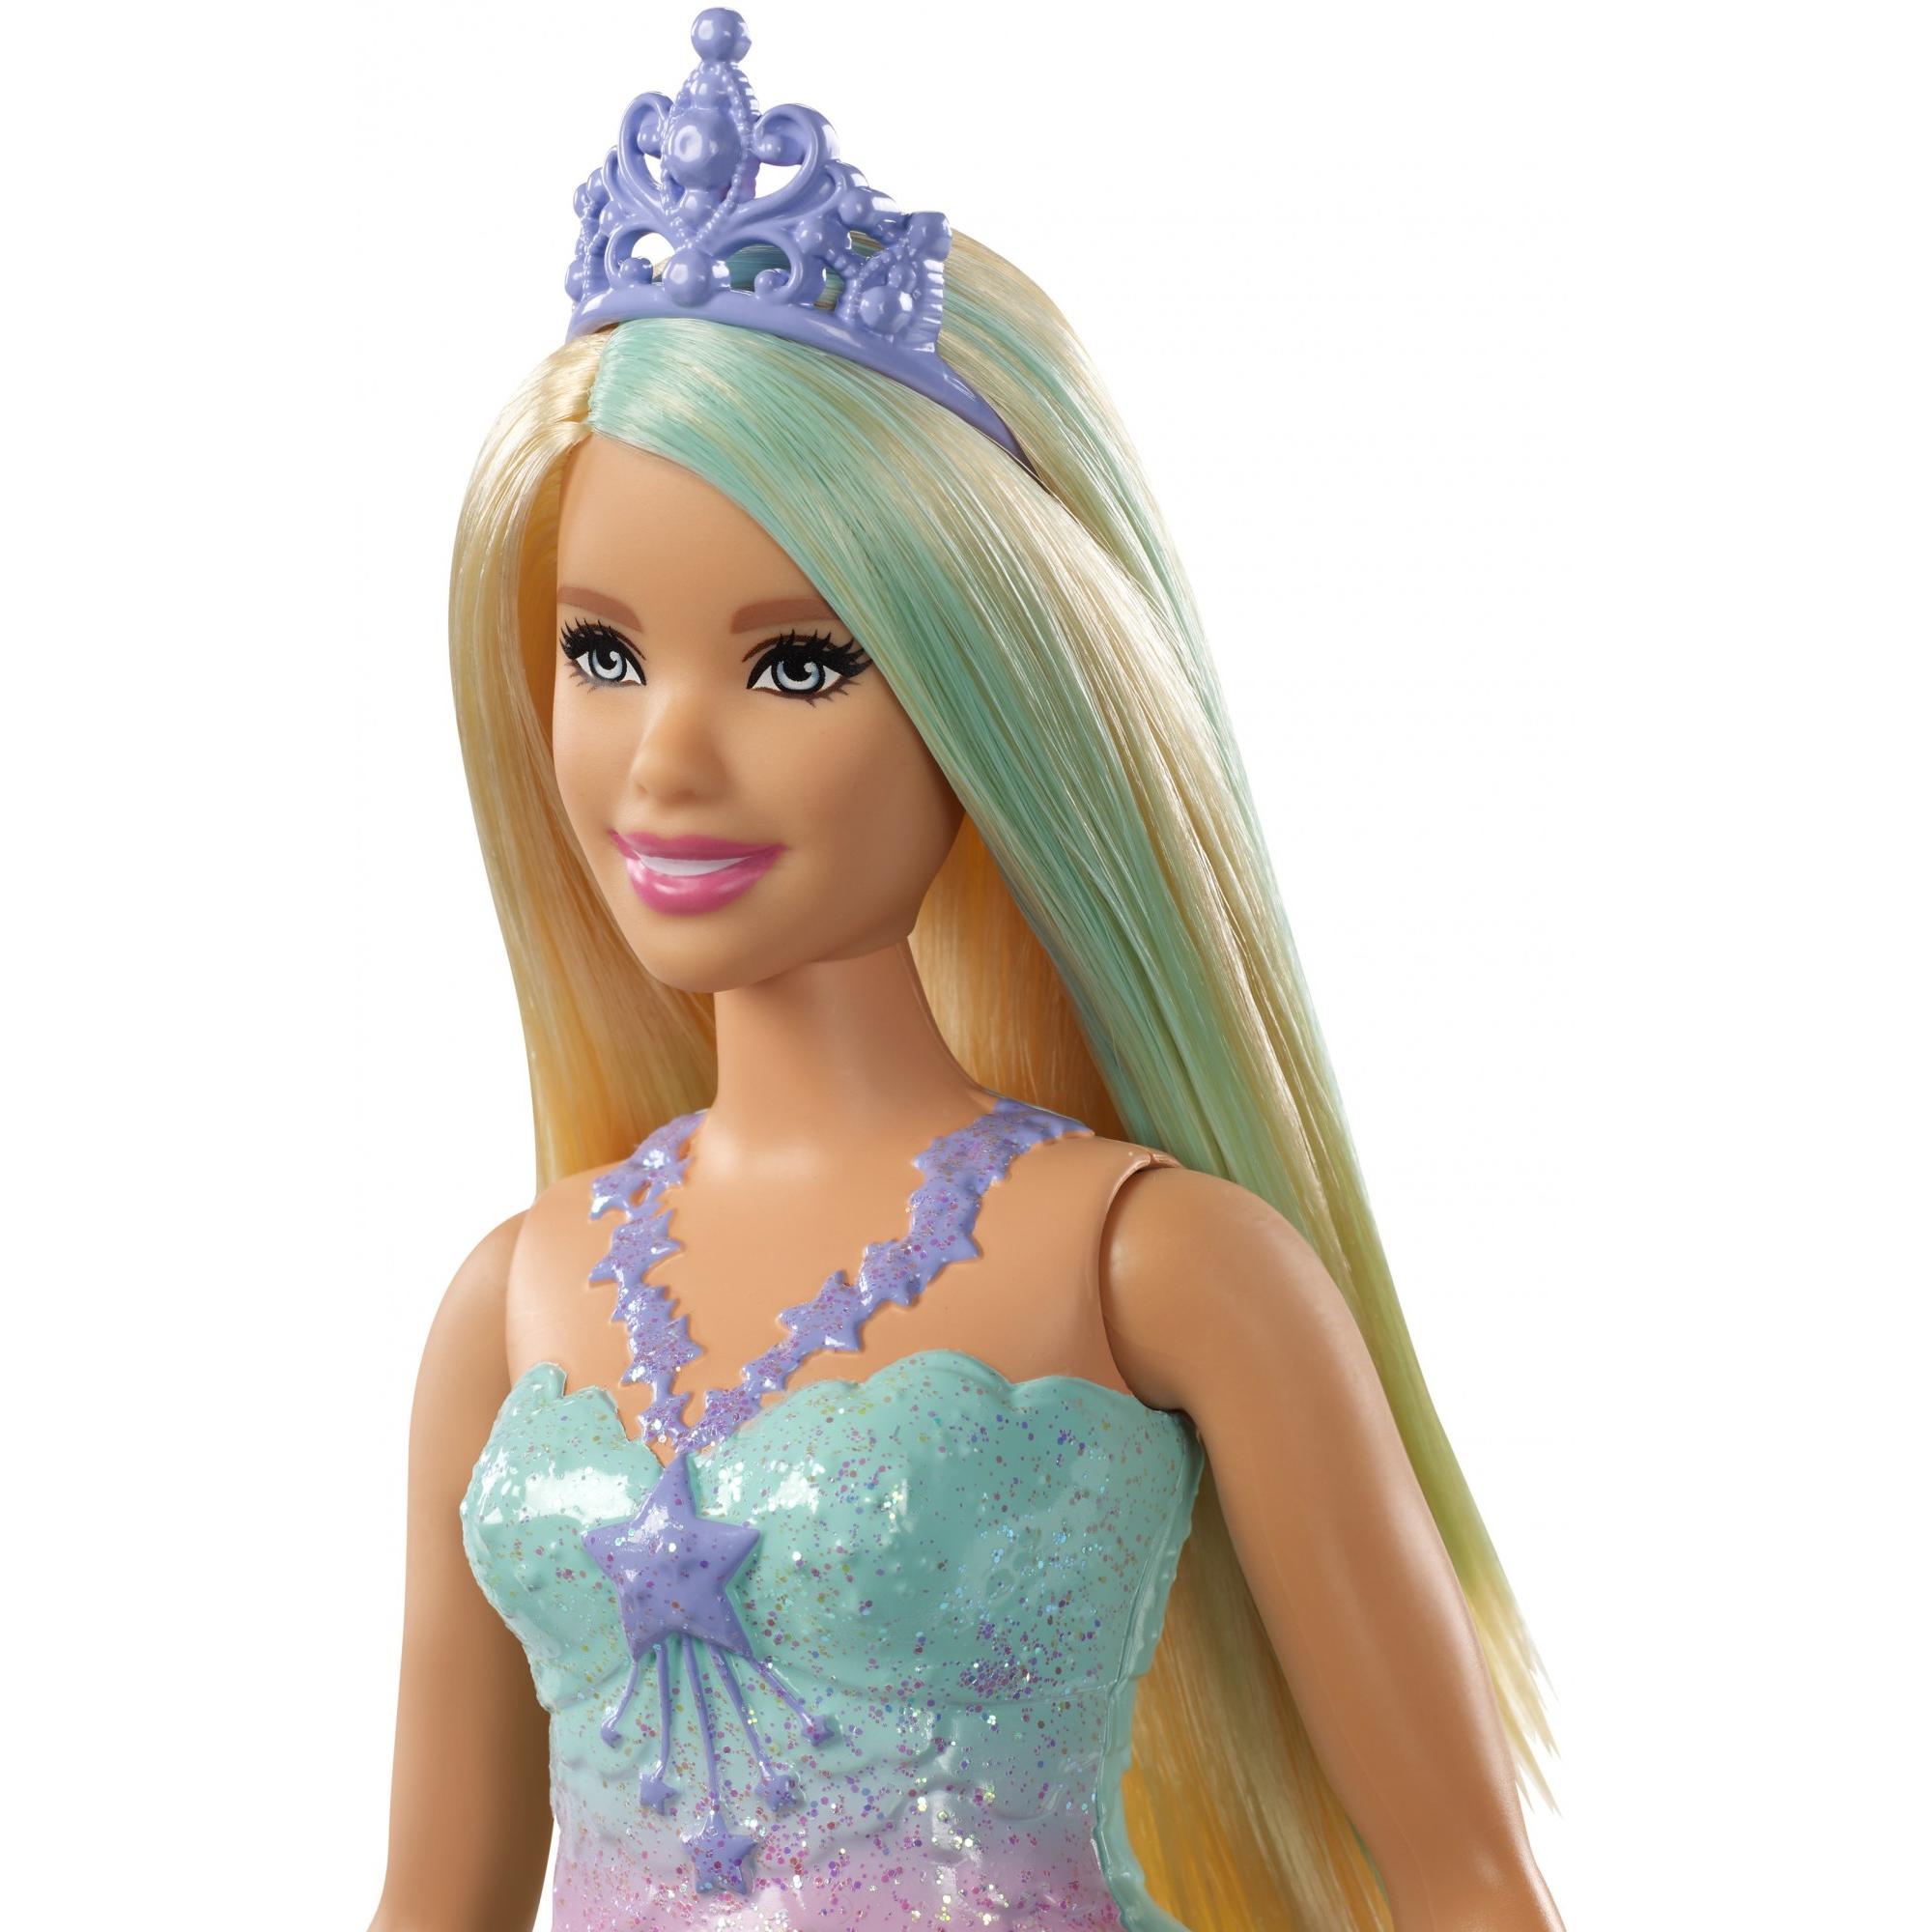 Barbie Dreamtopia Princess Doll, Blonde, Wearing Rainbow-Themed Outfit - image 4 of 7